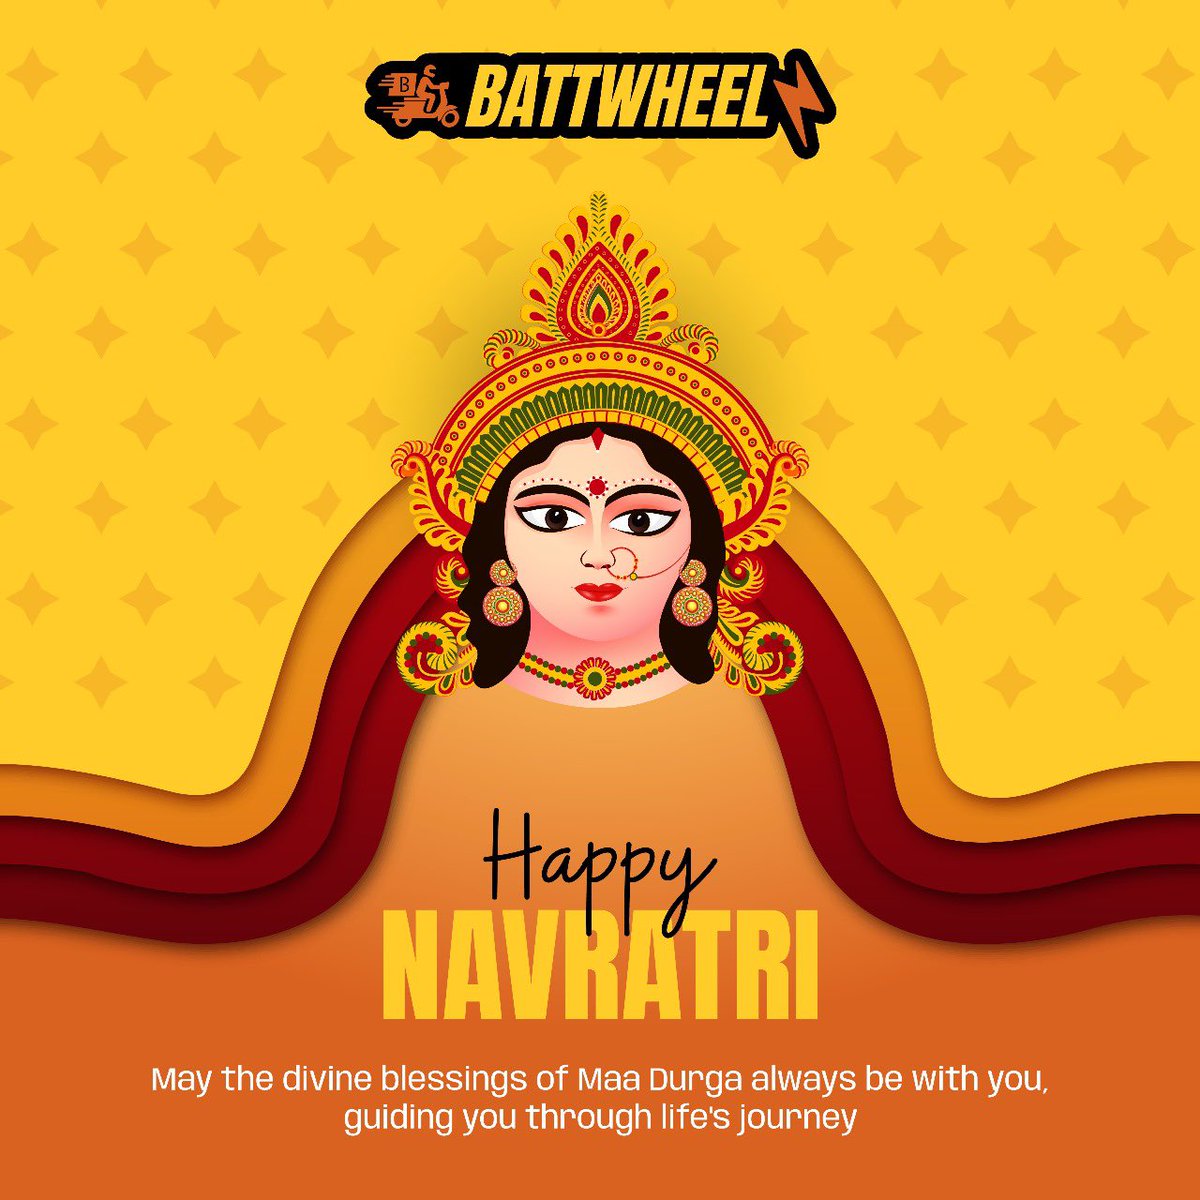 Battwheelz wishes you all a very Happy Navratri!
.
.
#Battwheelz #HappyNavratri #Navratri2023 #EV #MobilitySolutions #DeliveryService #India